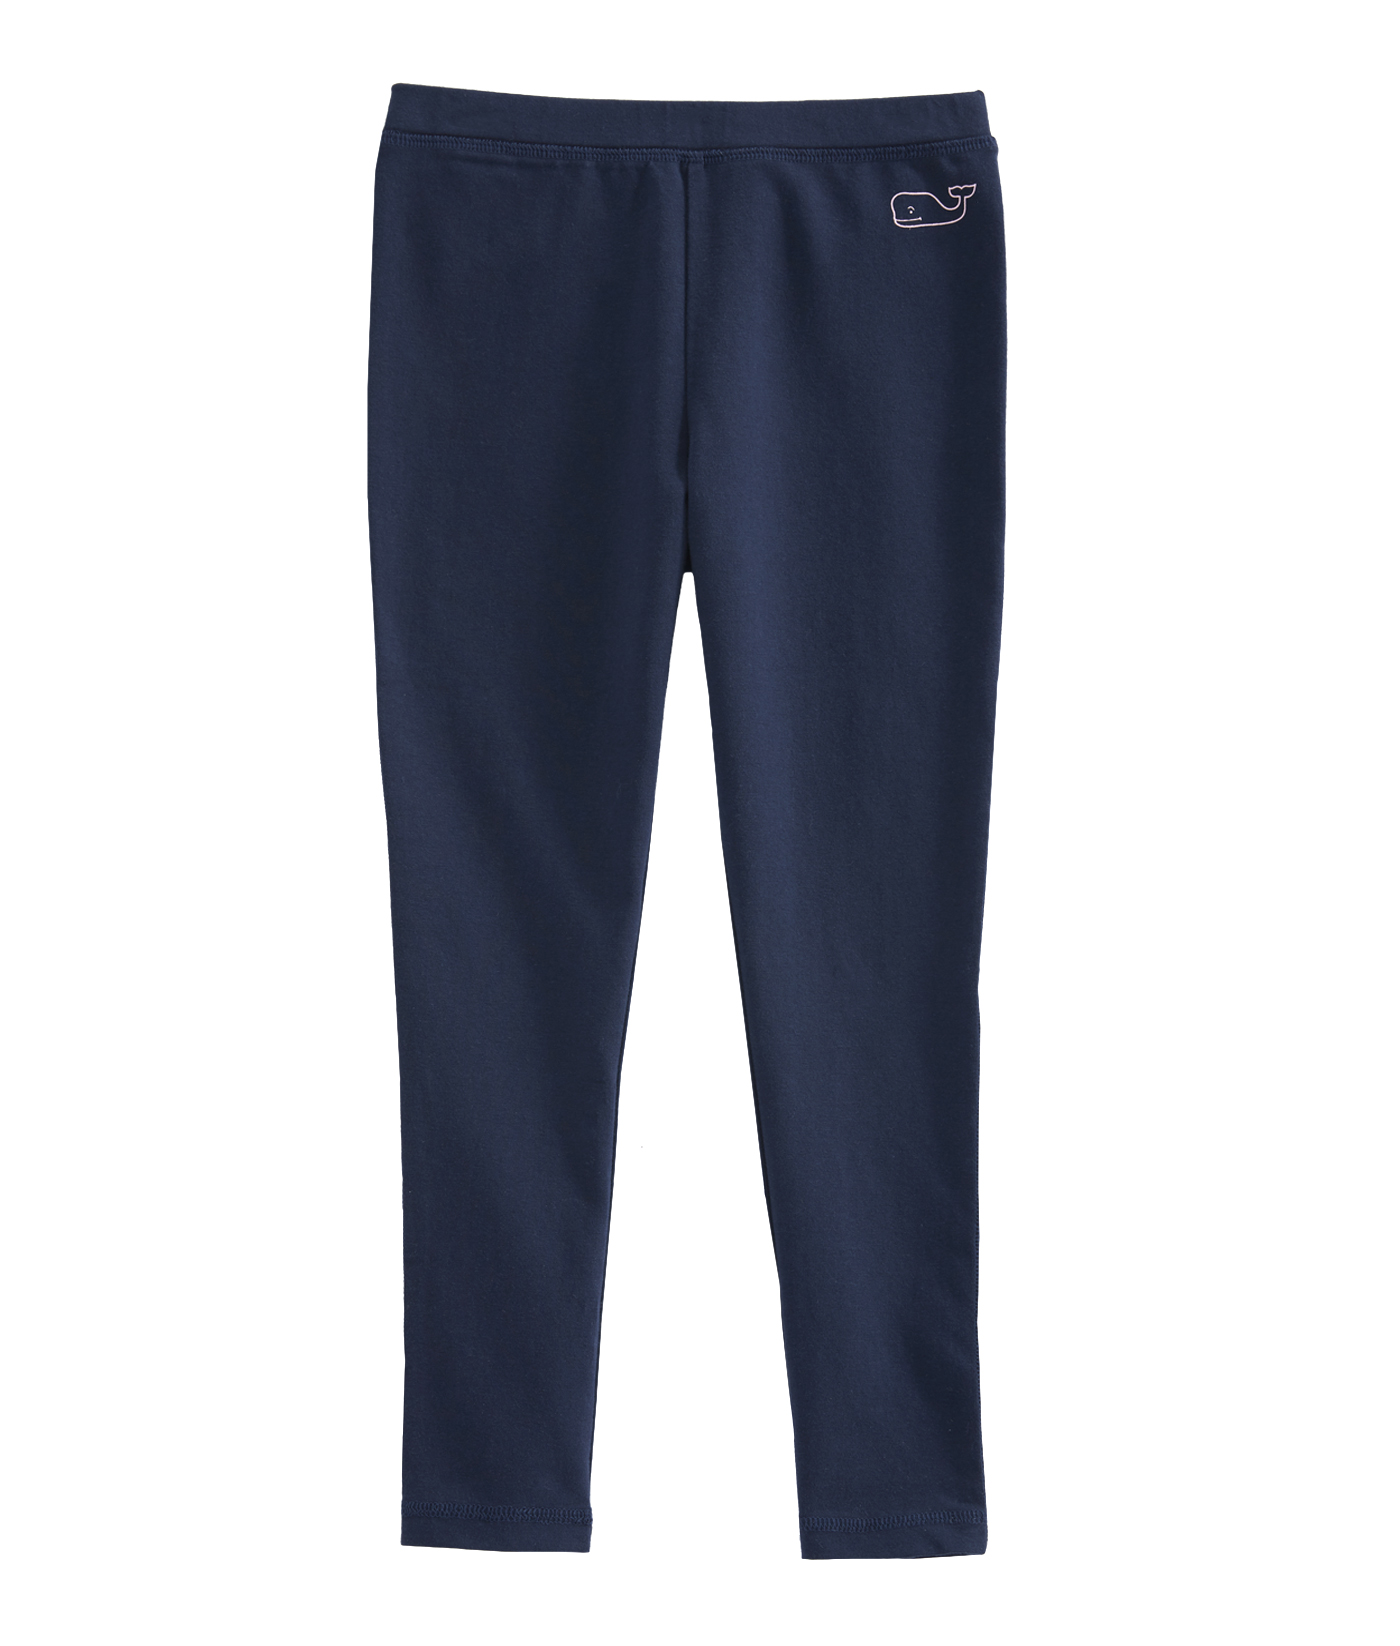 Shop Girls Solid Whale Knit All Day Leggings at vineyard vines